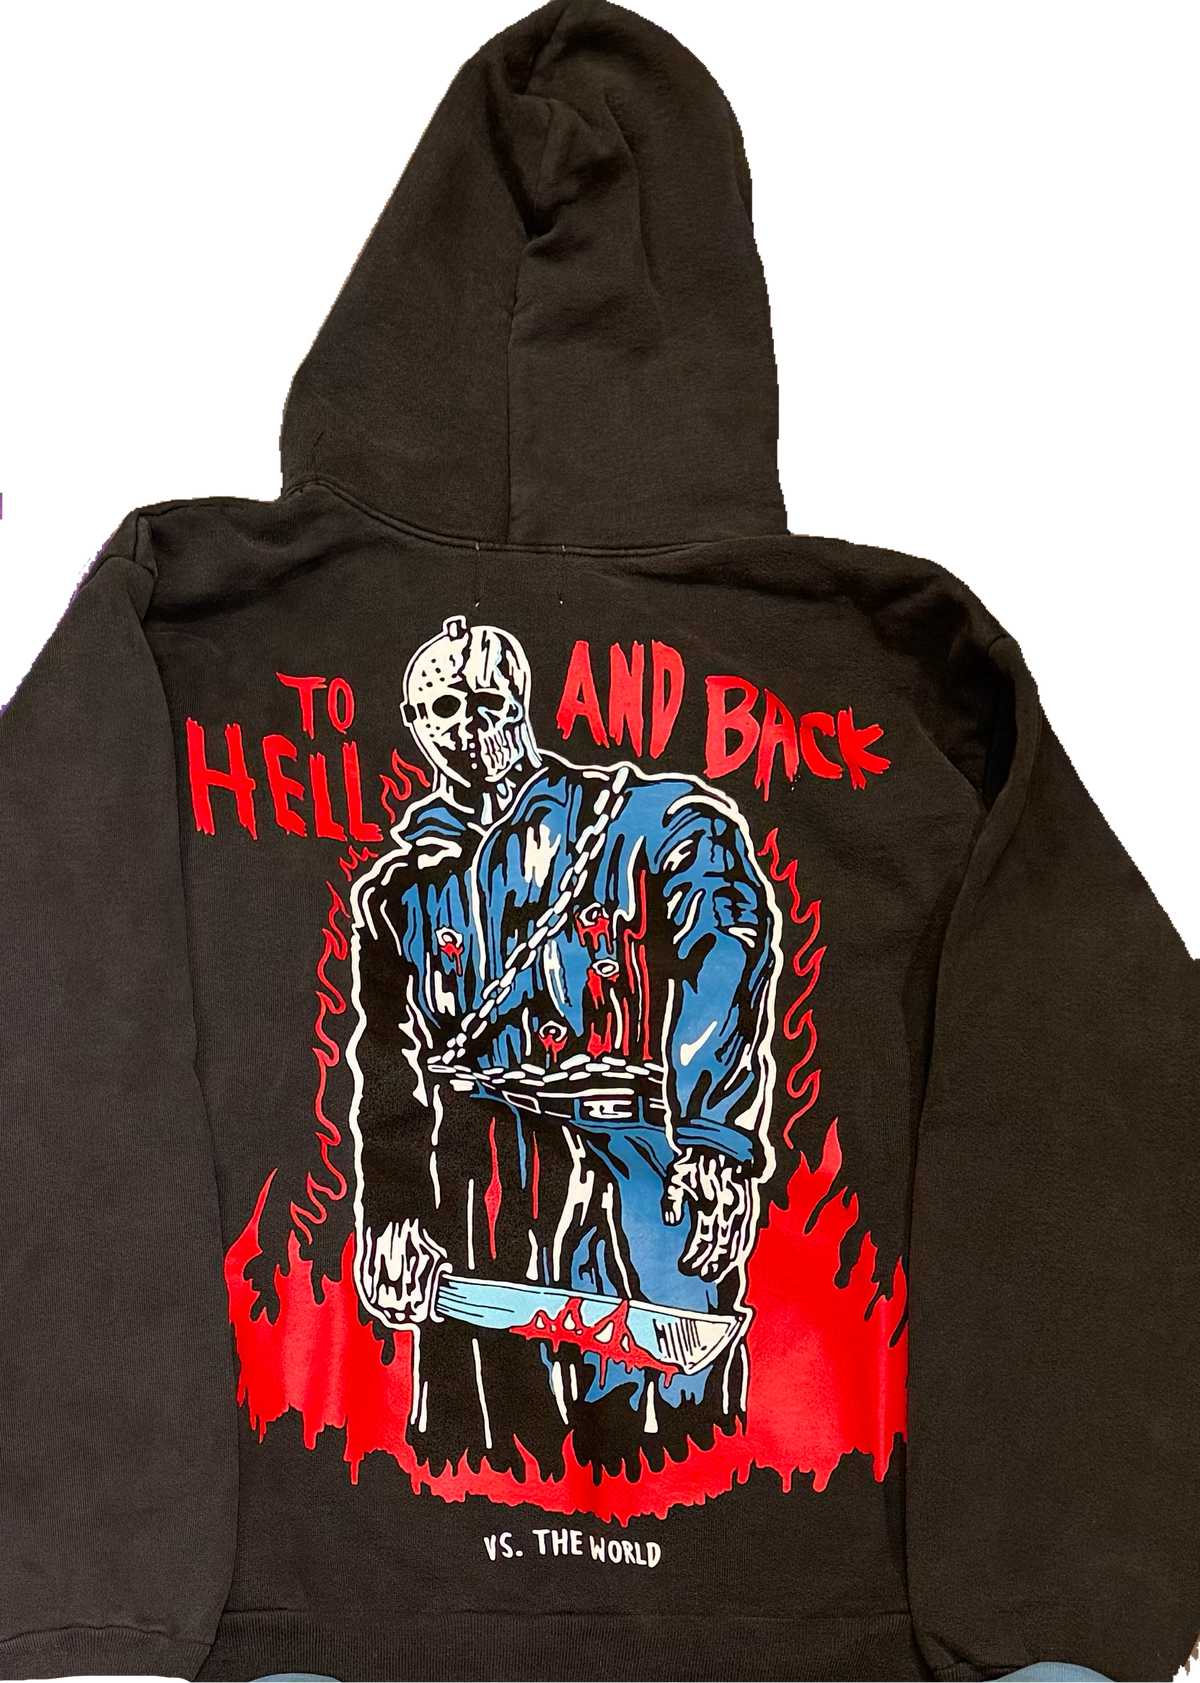 Warren Lotus 'To Hell and back' Hoodie